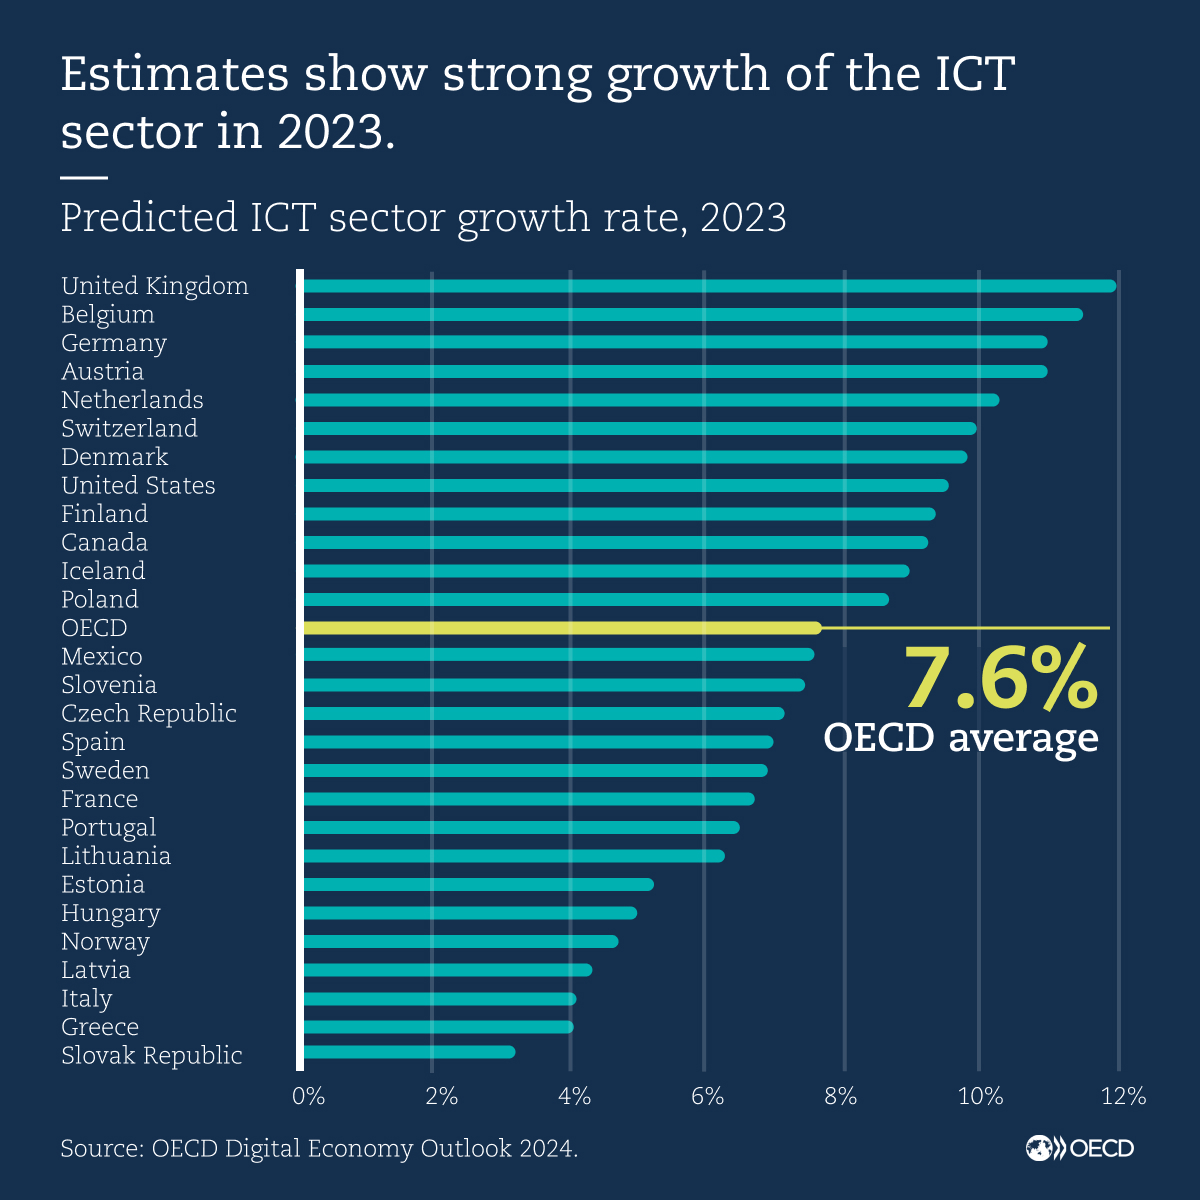 📈 In many #OECD countries, 2023 was a record year for #ICT sector growth: 🇦🇹 10.9% 🇧🇪 11.5% 🇨🇦 9.2% 🇩🇰 9.7% 🇫🇮 9.2% 🇩🇪 10.9% 🇳🇱 10.2% 🇨🇭 9.9% 🇬🇧 11.9% 🇺🇸 9.4% 📊 Find out more in the new OECD #DigitalEconomy Outlook 2024: oe.cd/il/deo-ch1 #OECDdigital